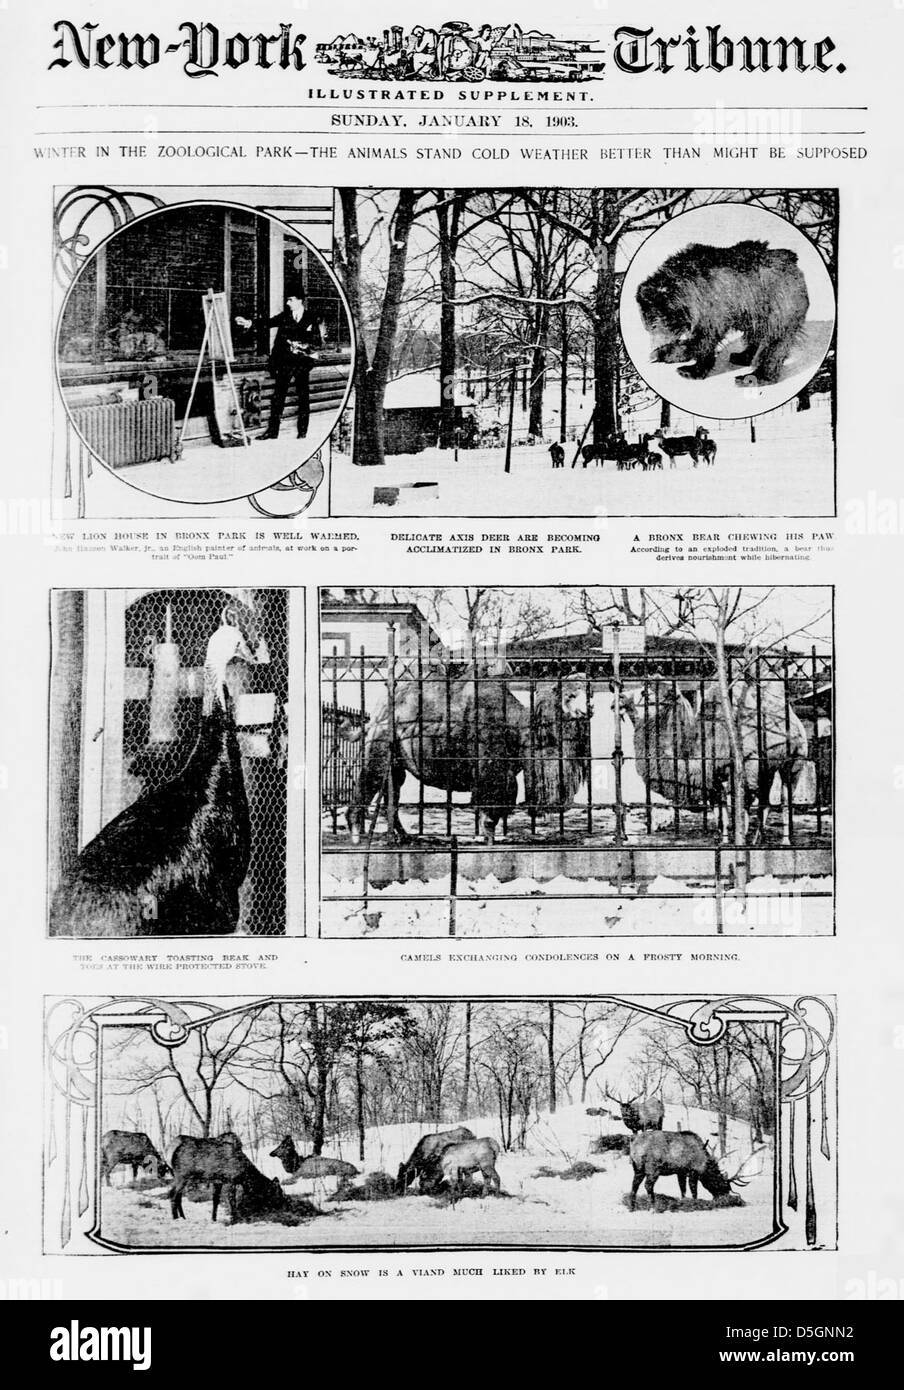 Winter in the zoological park - the animals stand cold weather better then might be supposed (LOC) Stock Photo